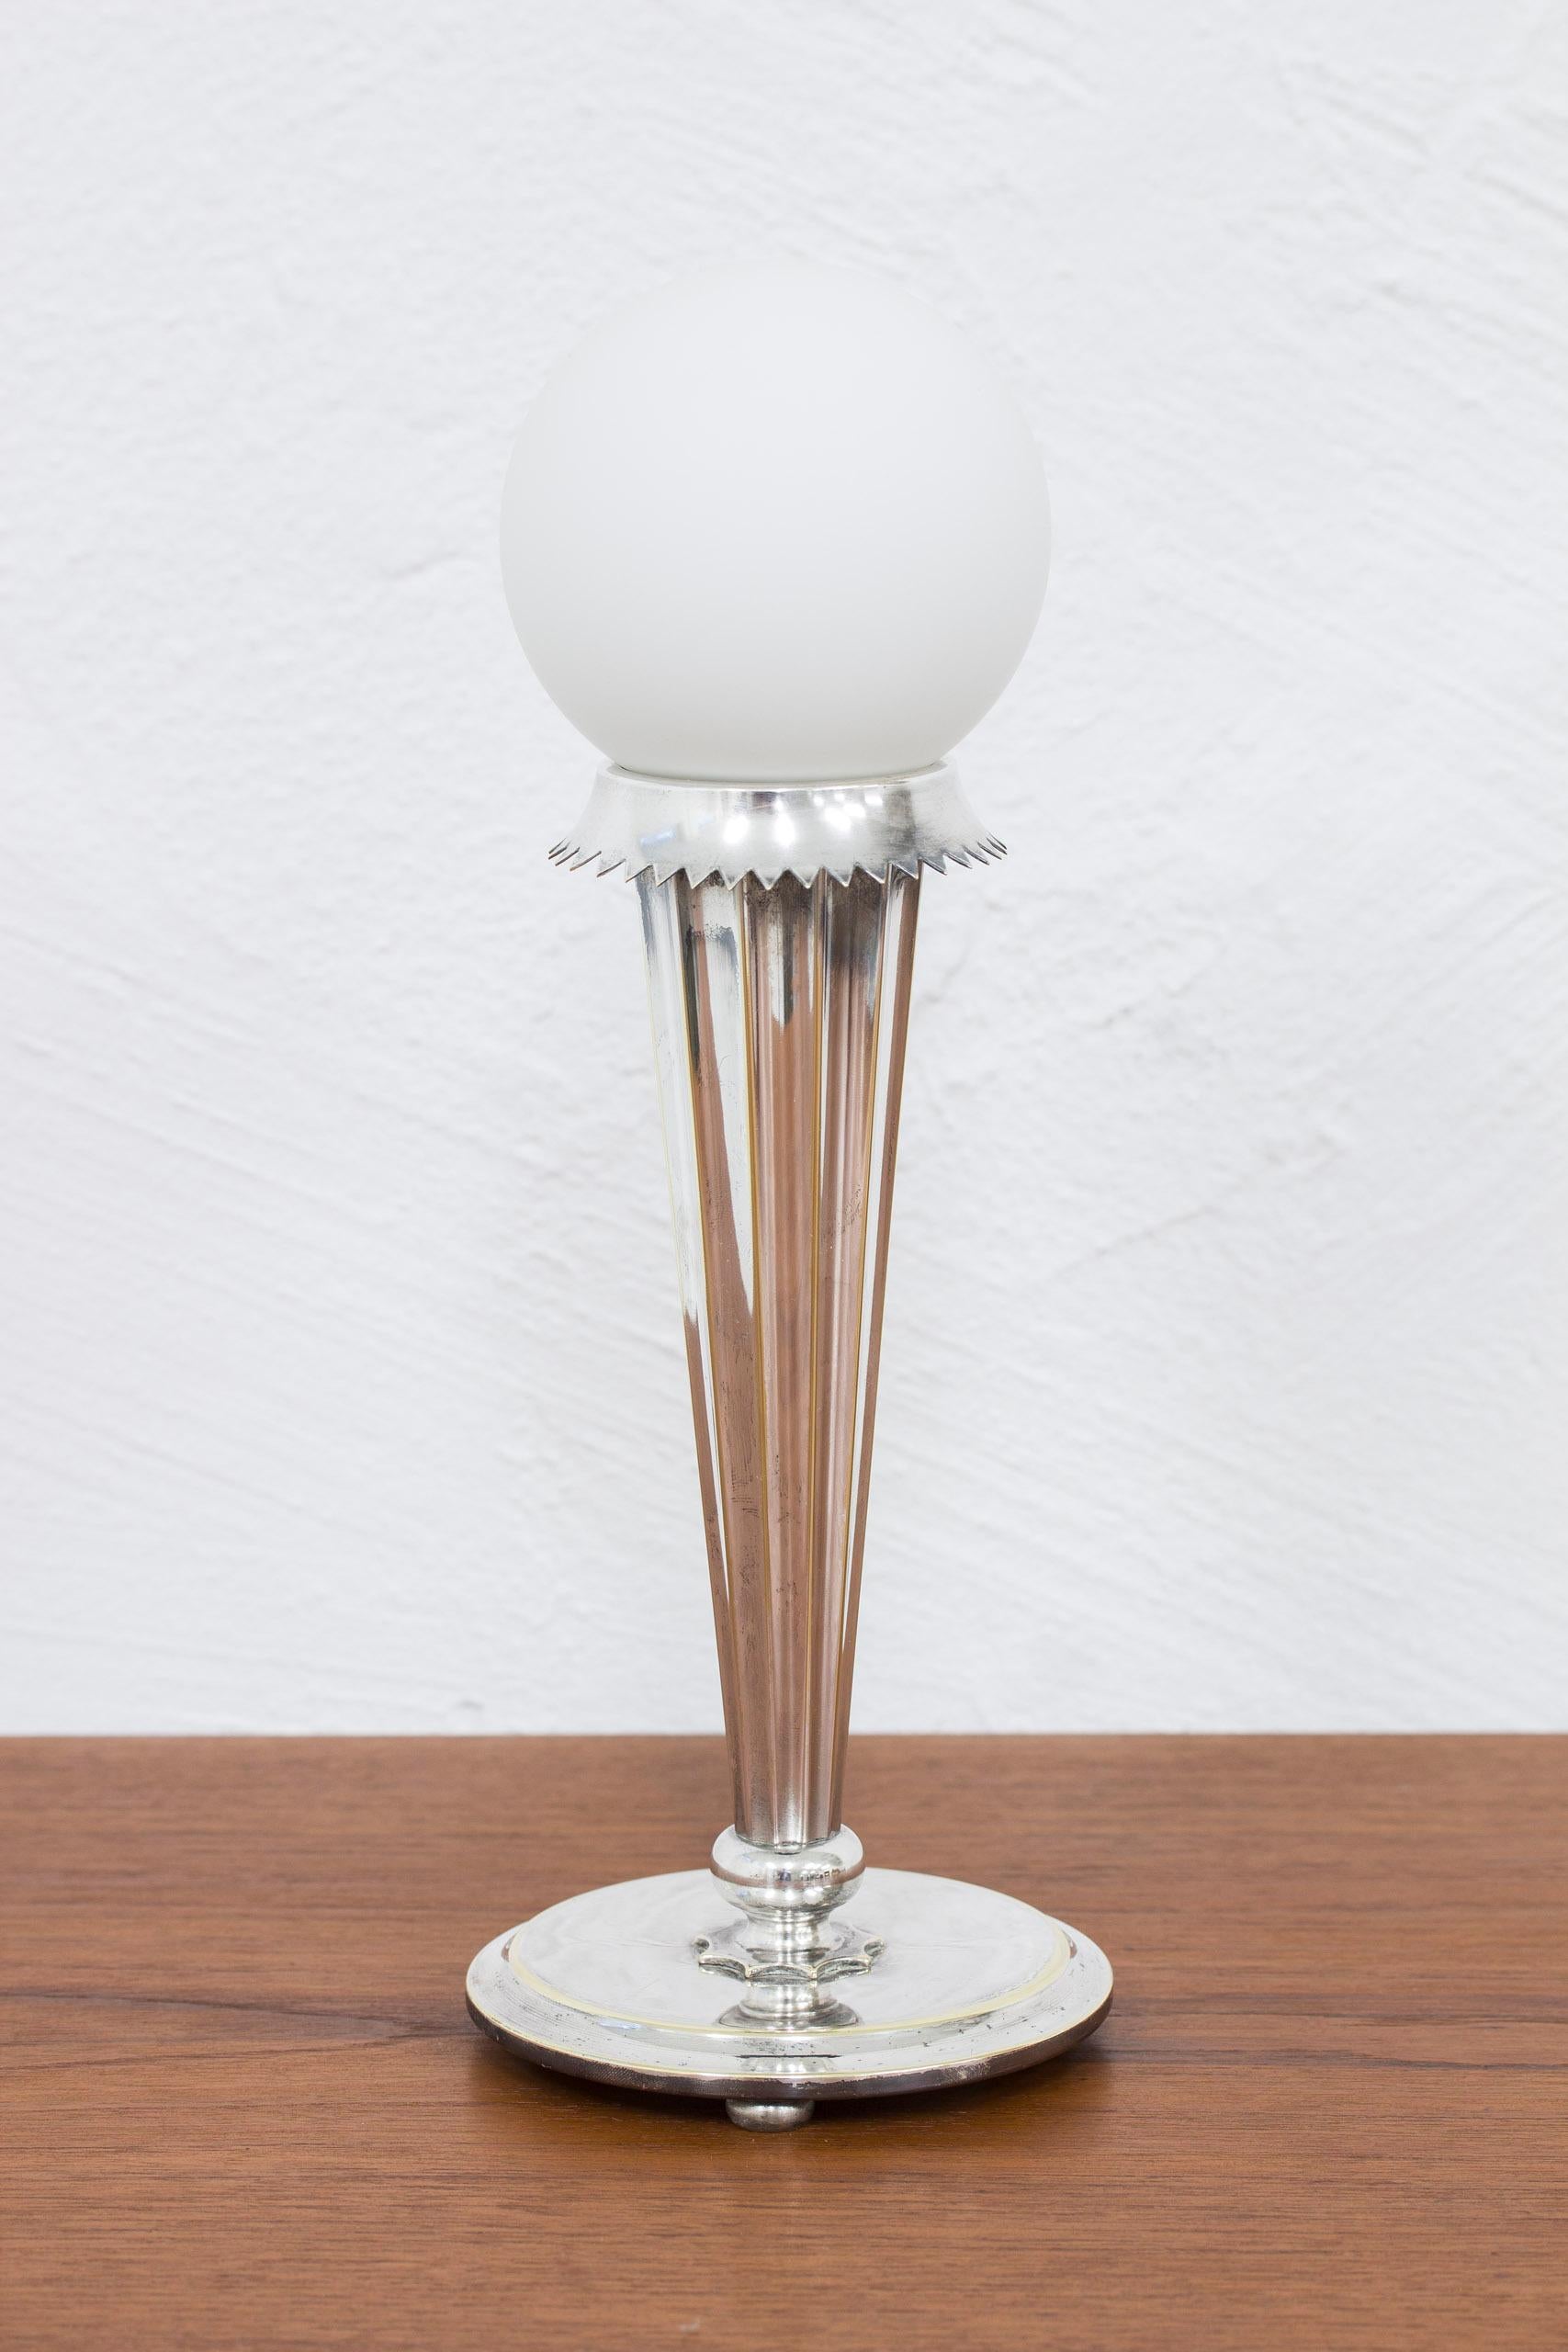 Swedish Grace Table Lamp 6853 by Harald Elof Notini for Böhlmarks, Sweden 1920s For Sale 4